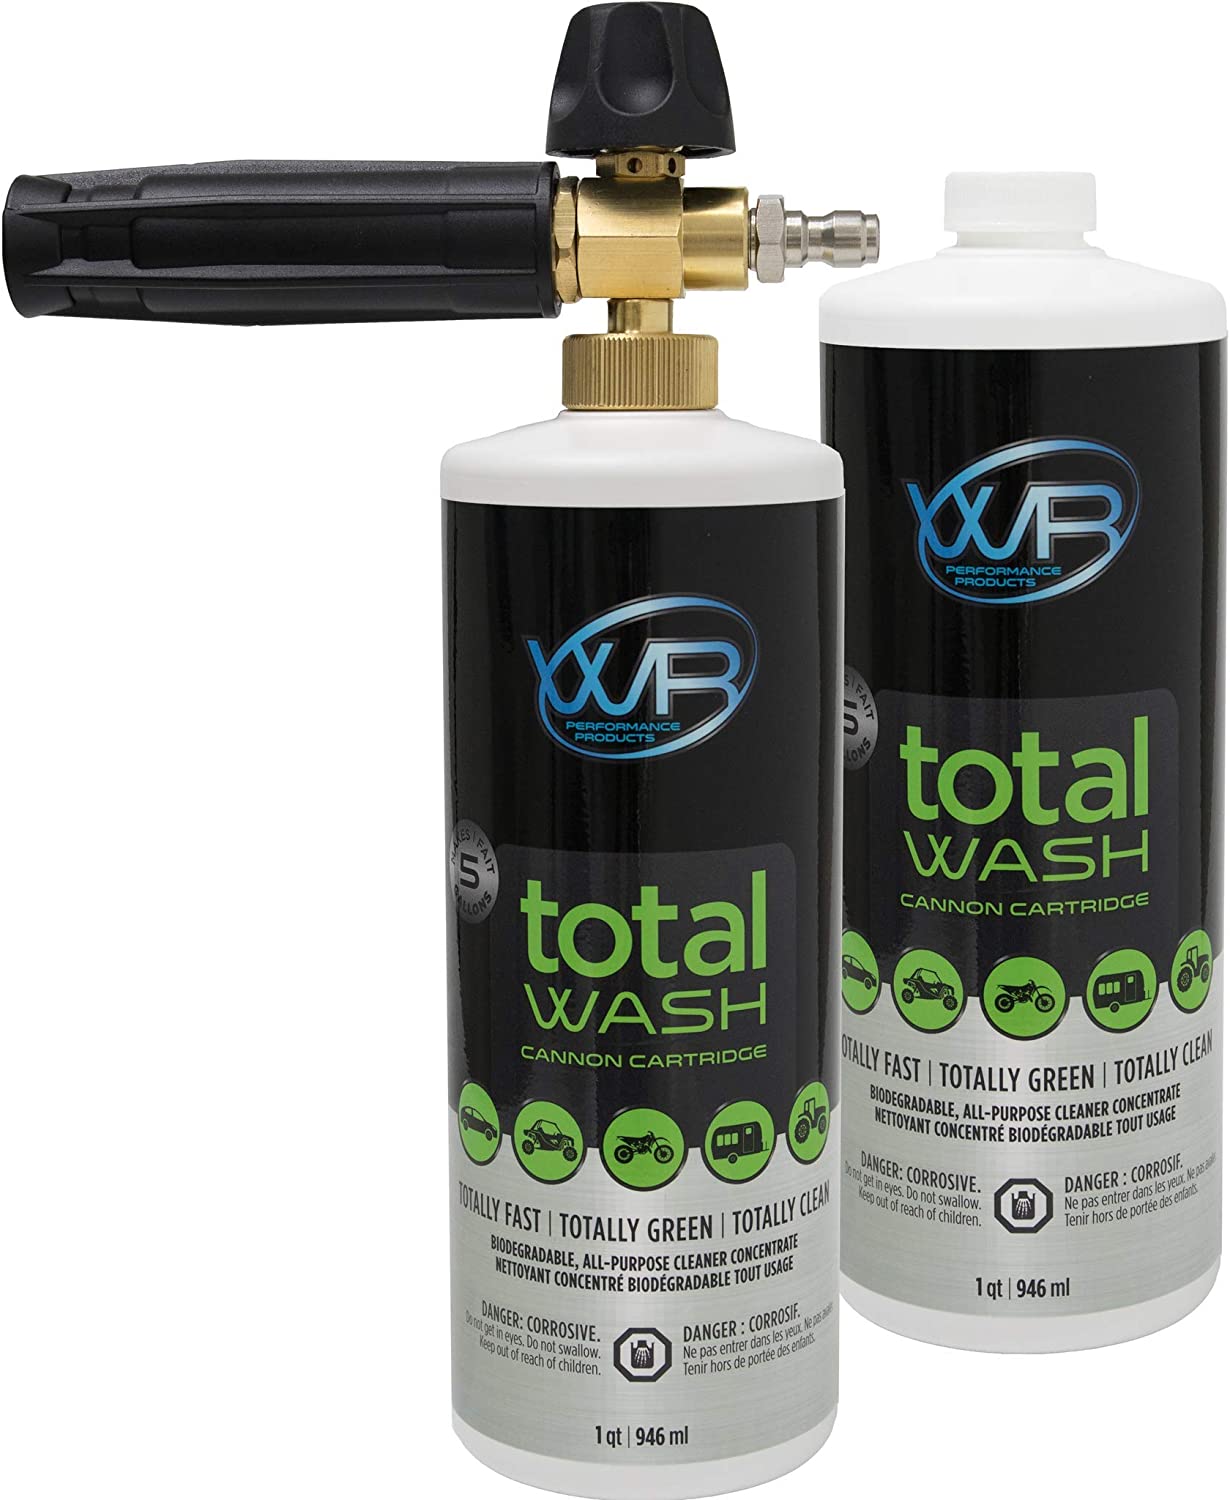 WR Performance Products Total Wash Off-Road Cannon Cartridge